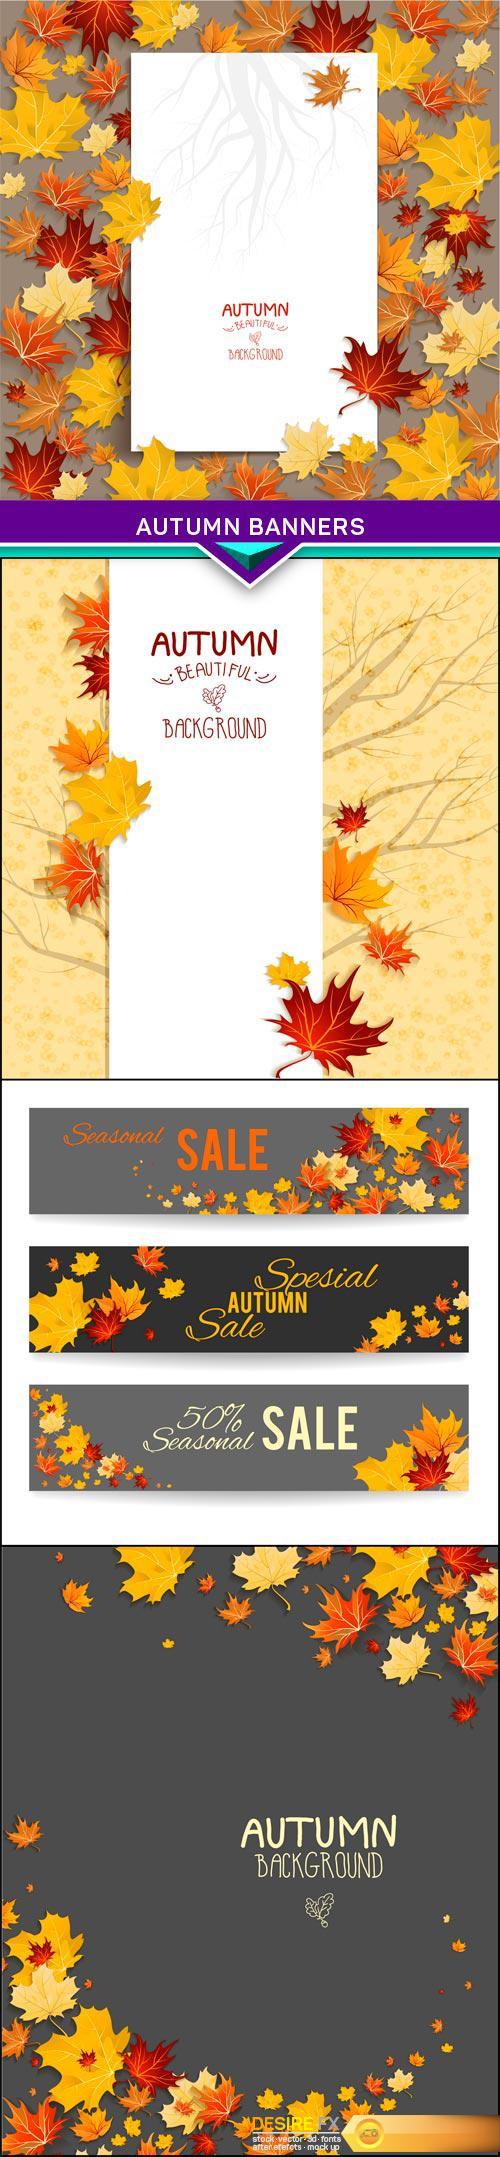 Autumn banners 5X EPS